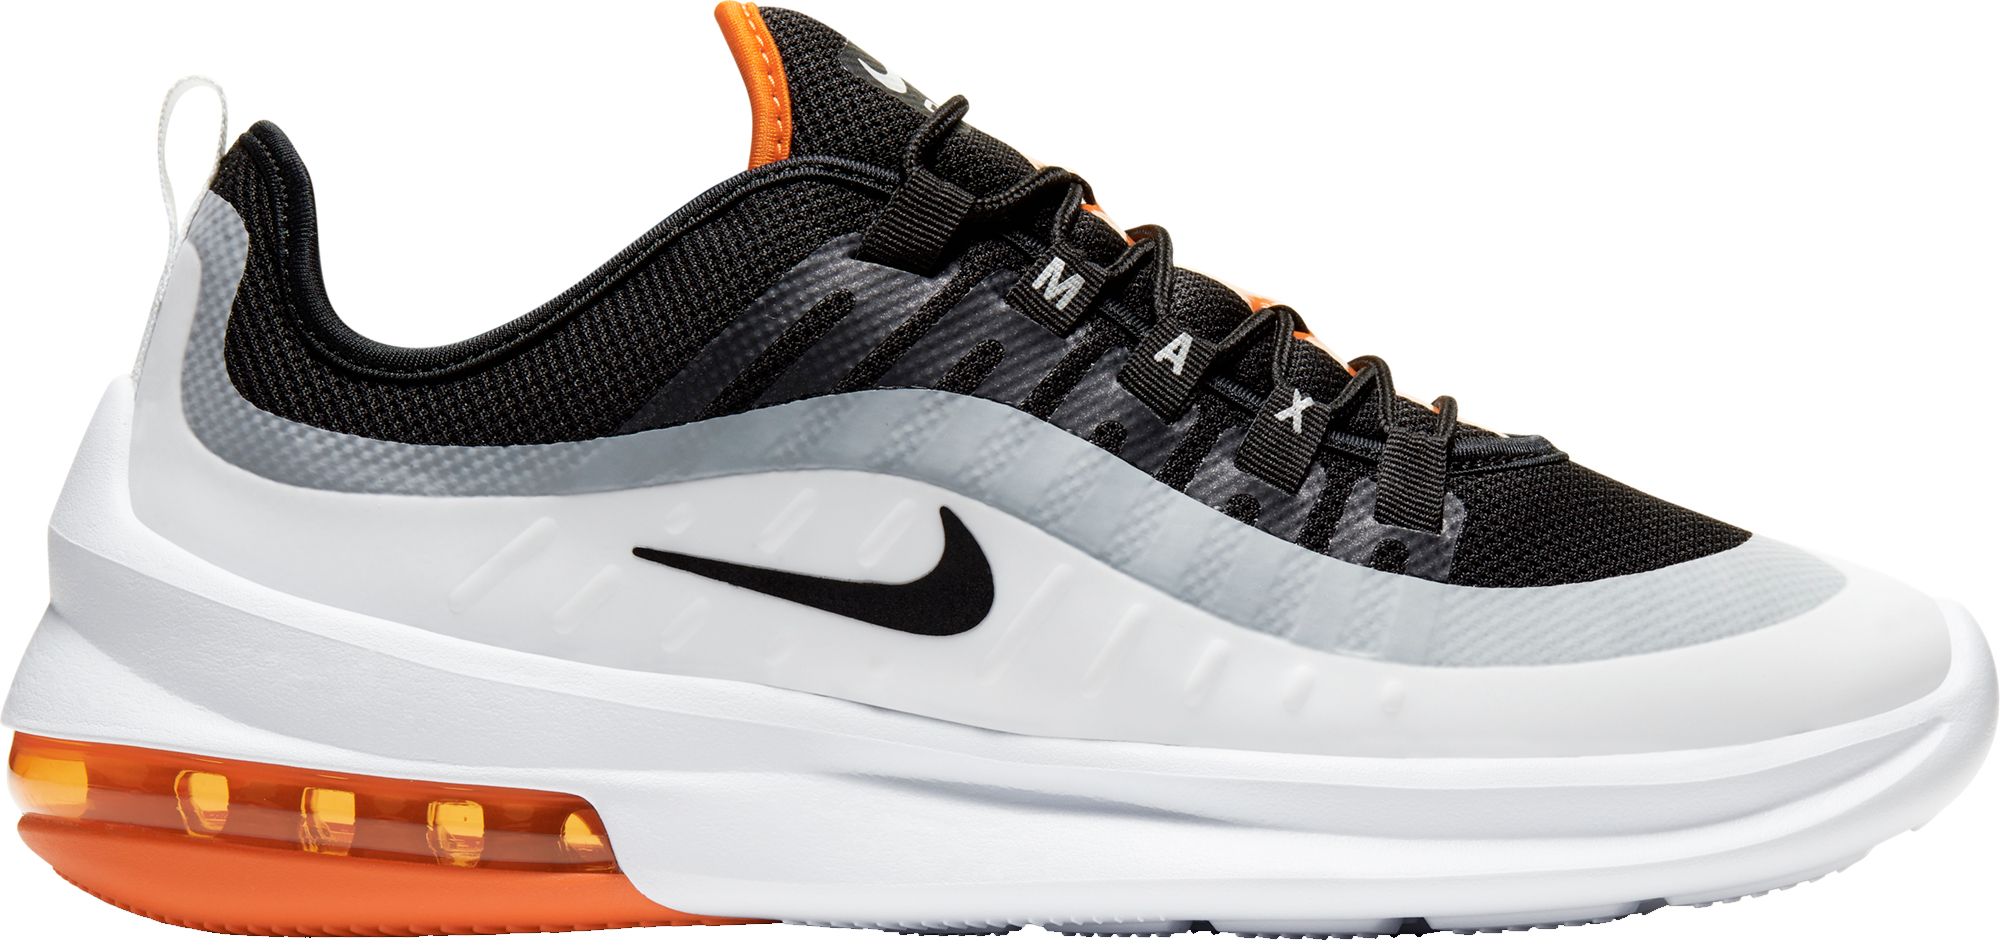 Nike Men's Air Max Axis Shoes | Free Curbside Pick Up at DICK'S